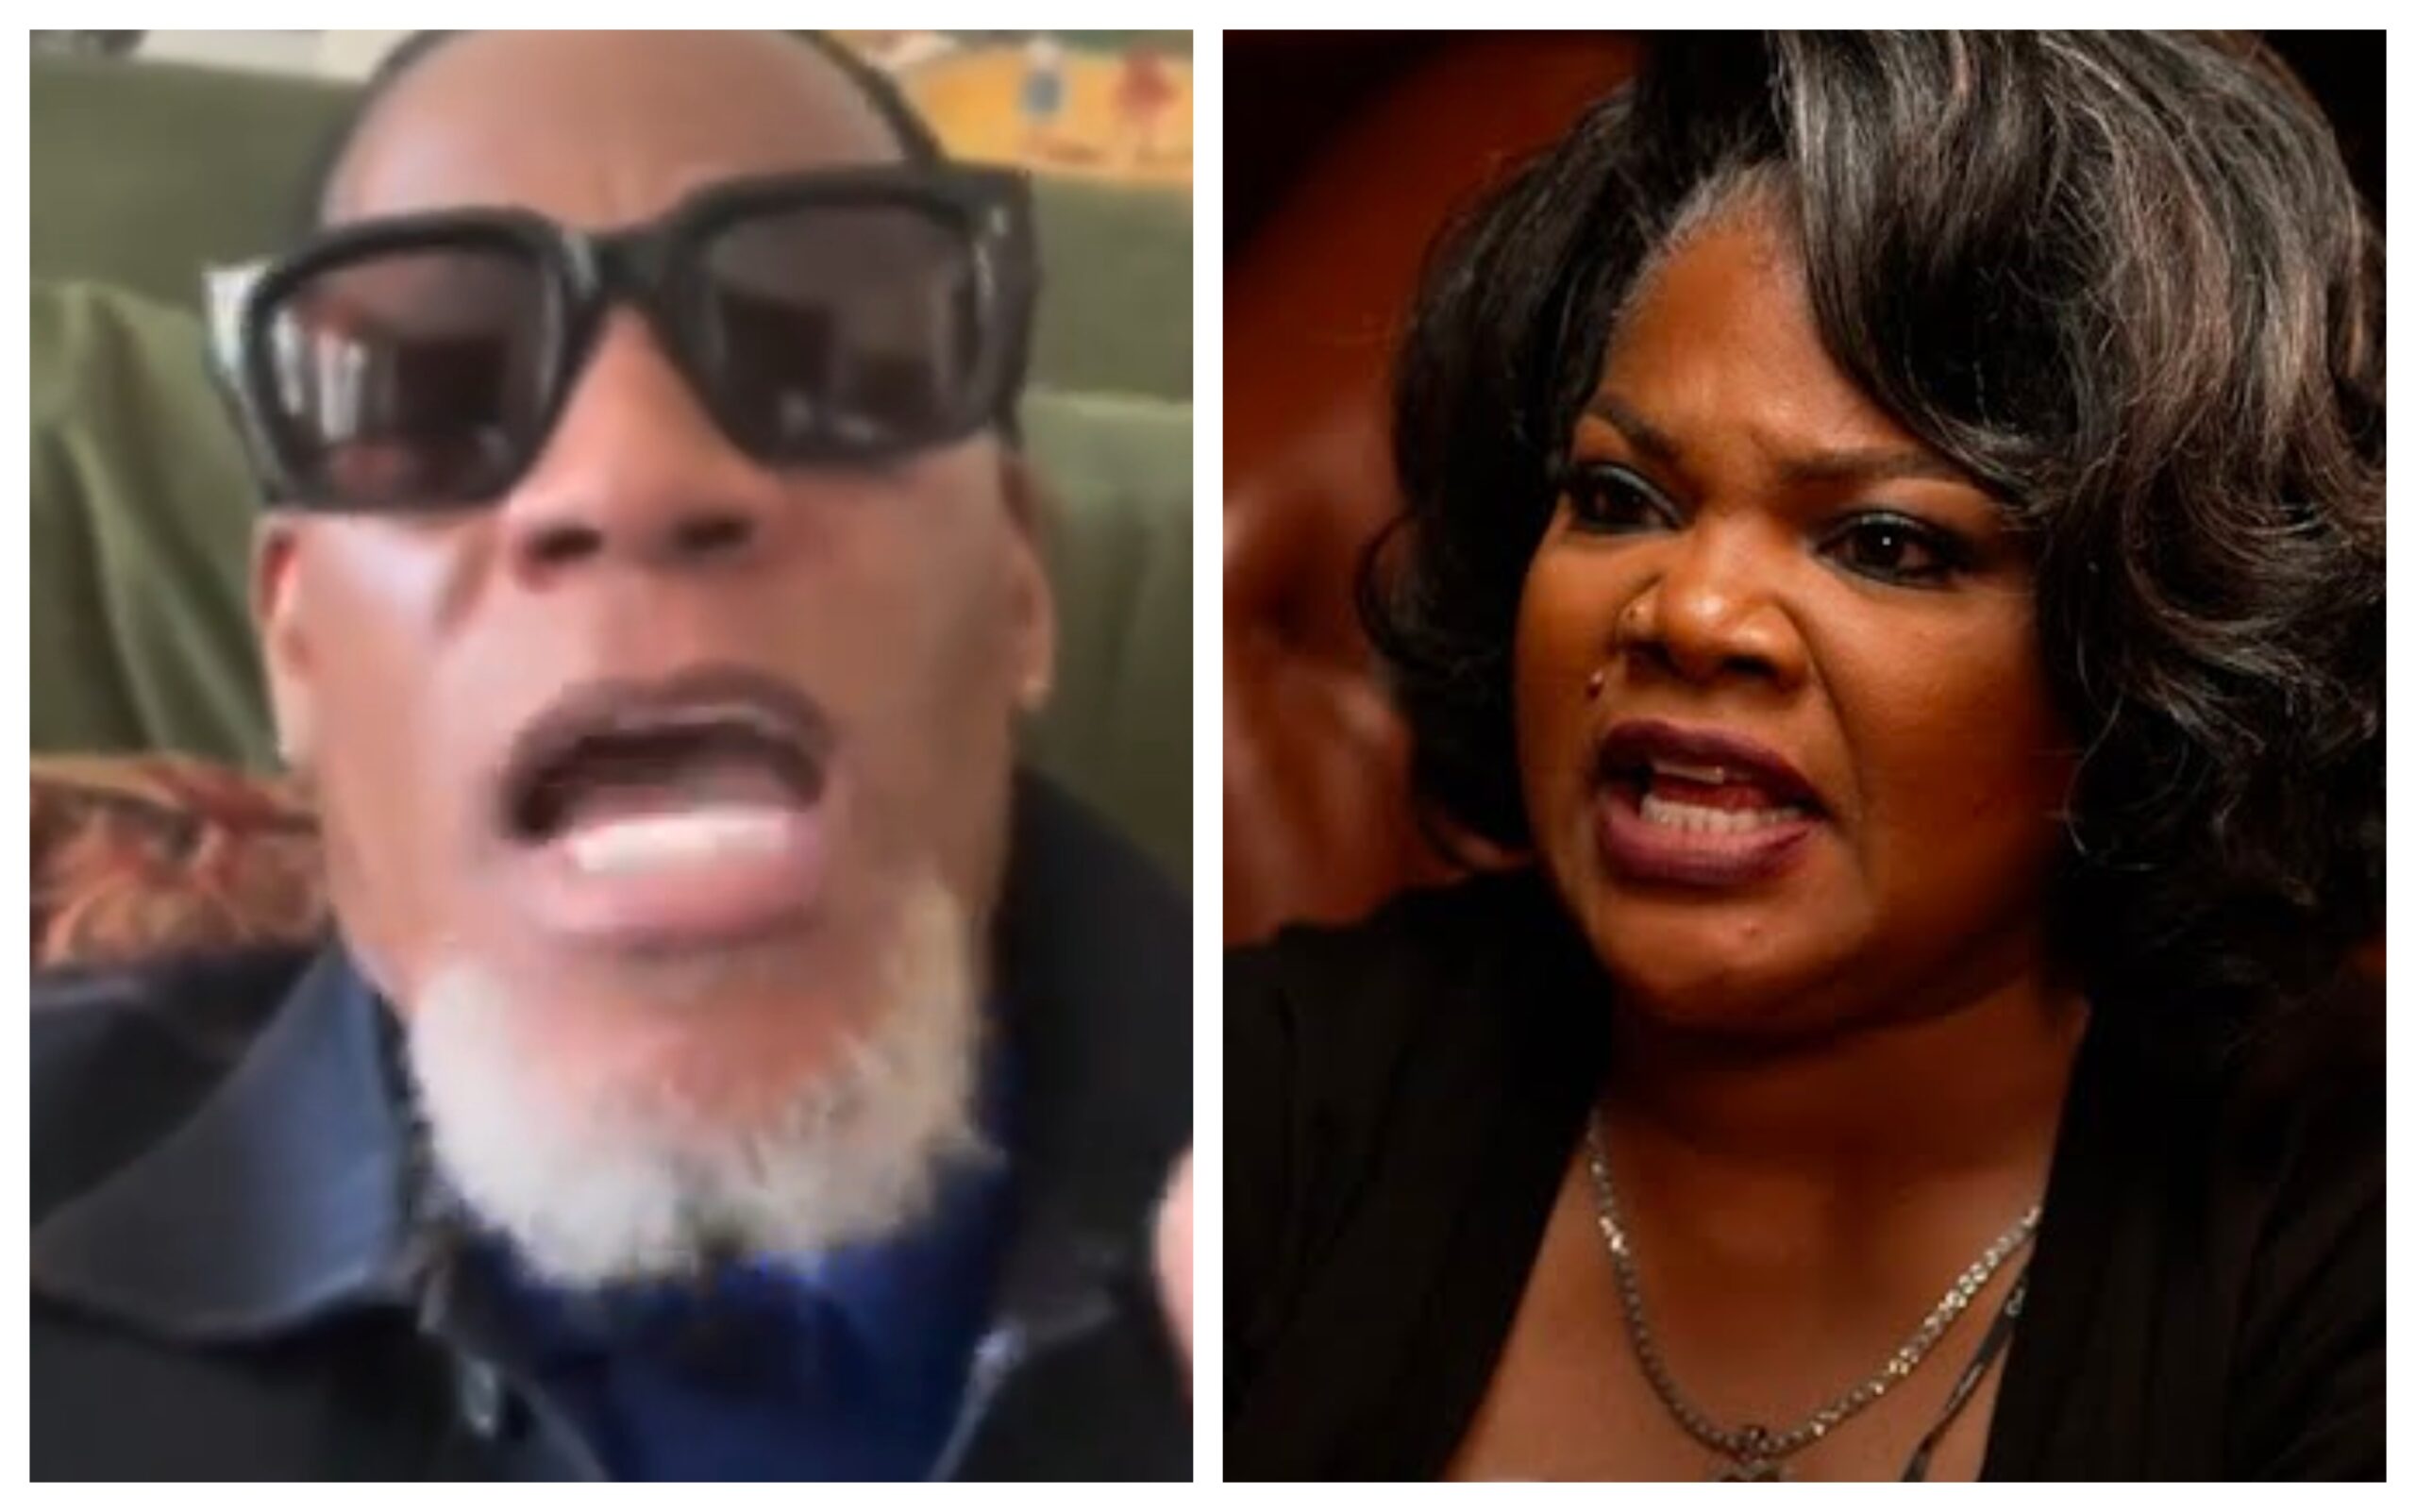 D.L. Hughley BLASTS Mo’Nique After Club Shay Shay Interview: “She’s a F**king Liar” Whose “Netflix Special Was TRASH”